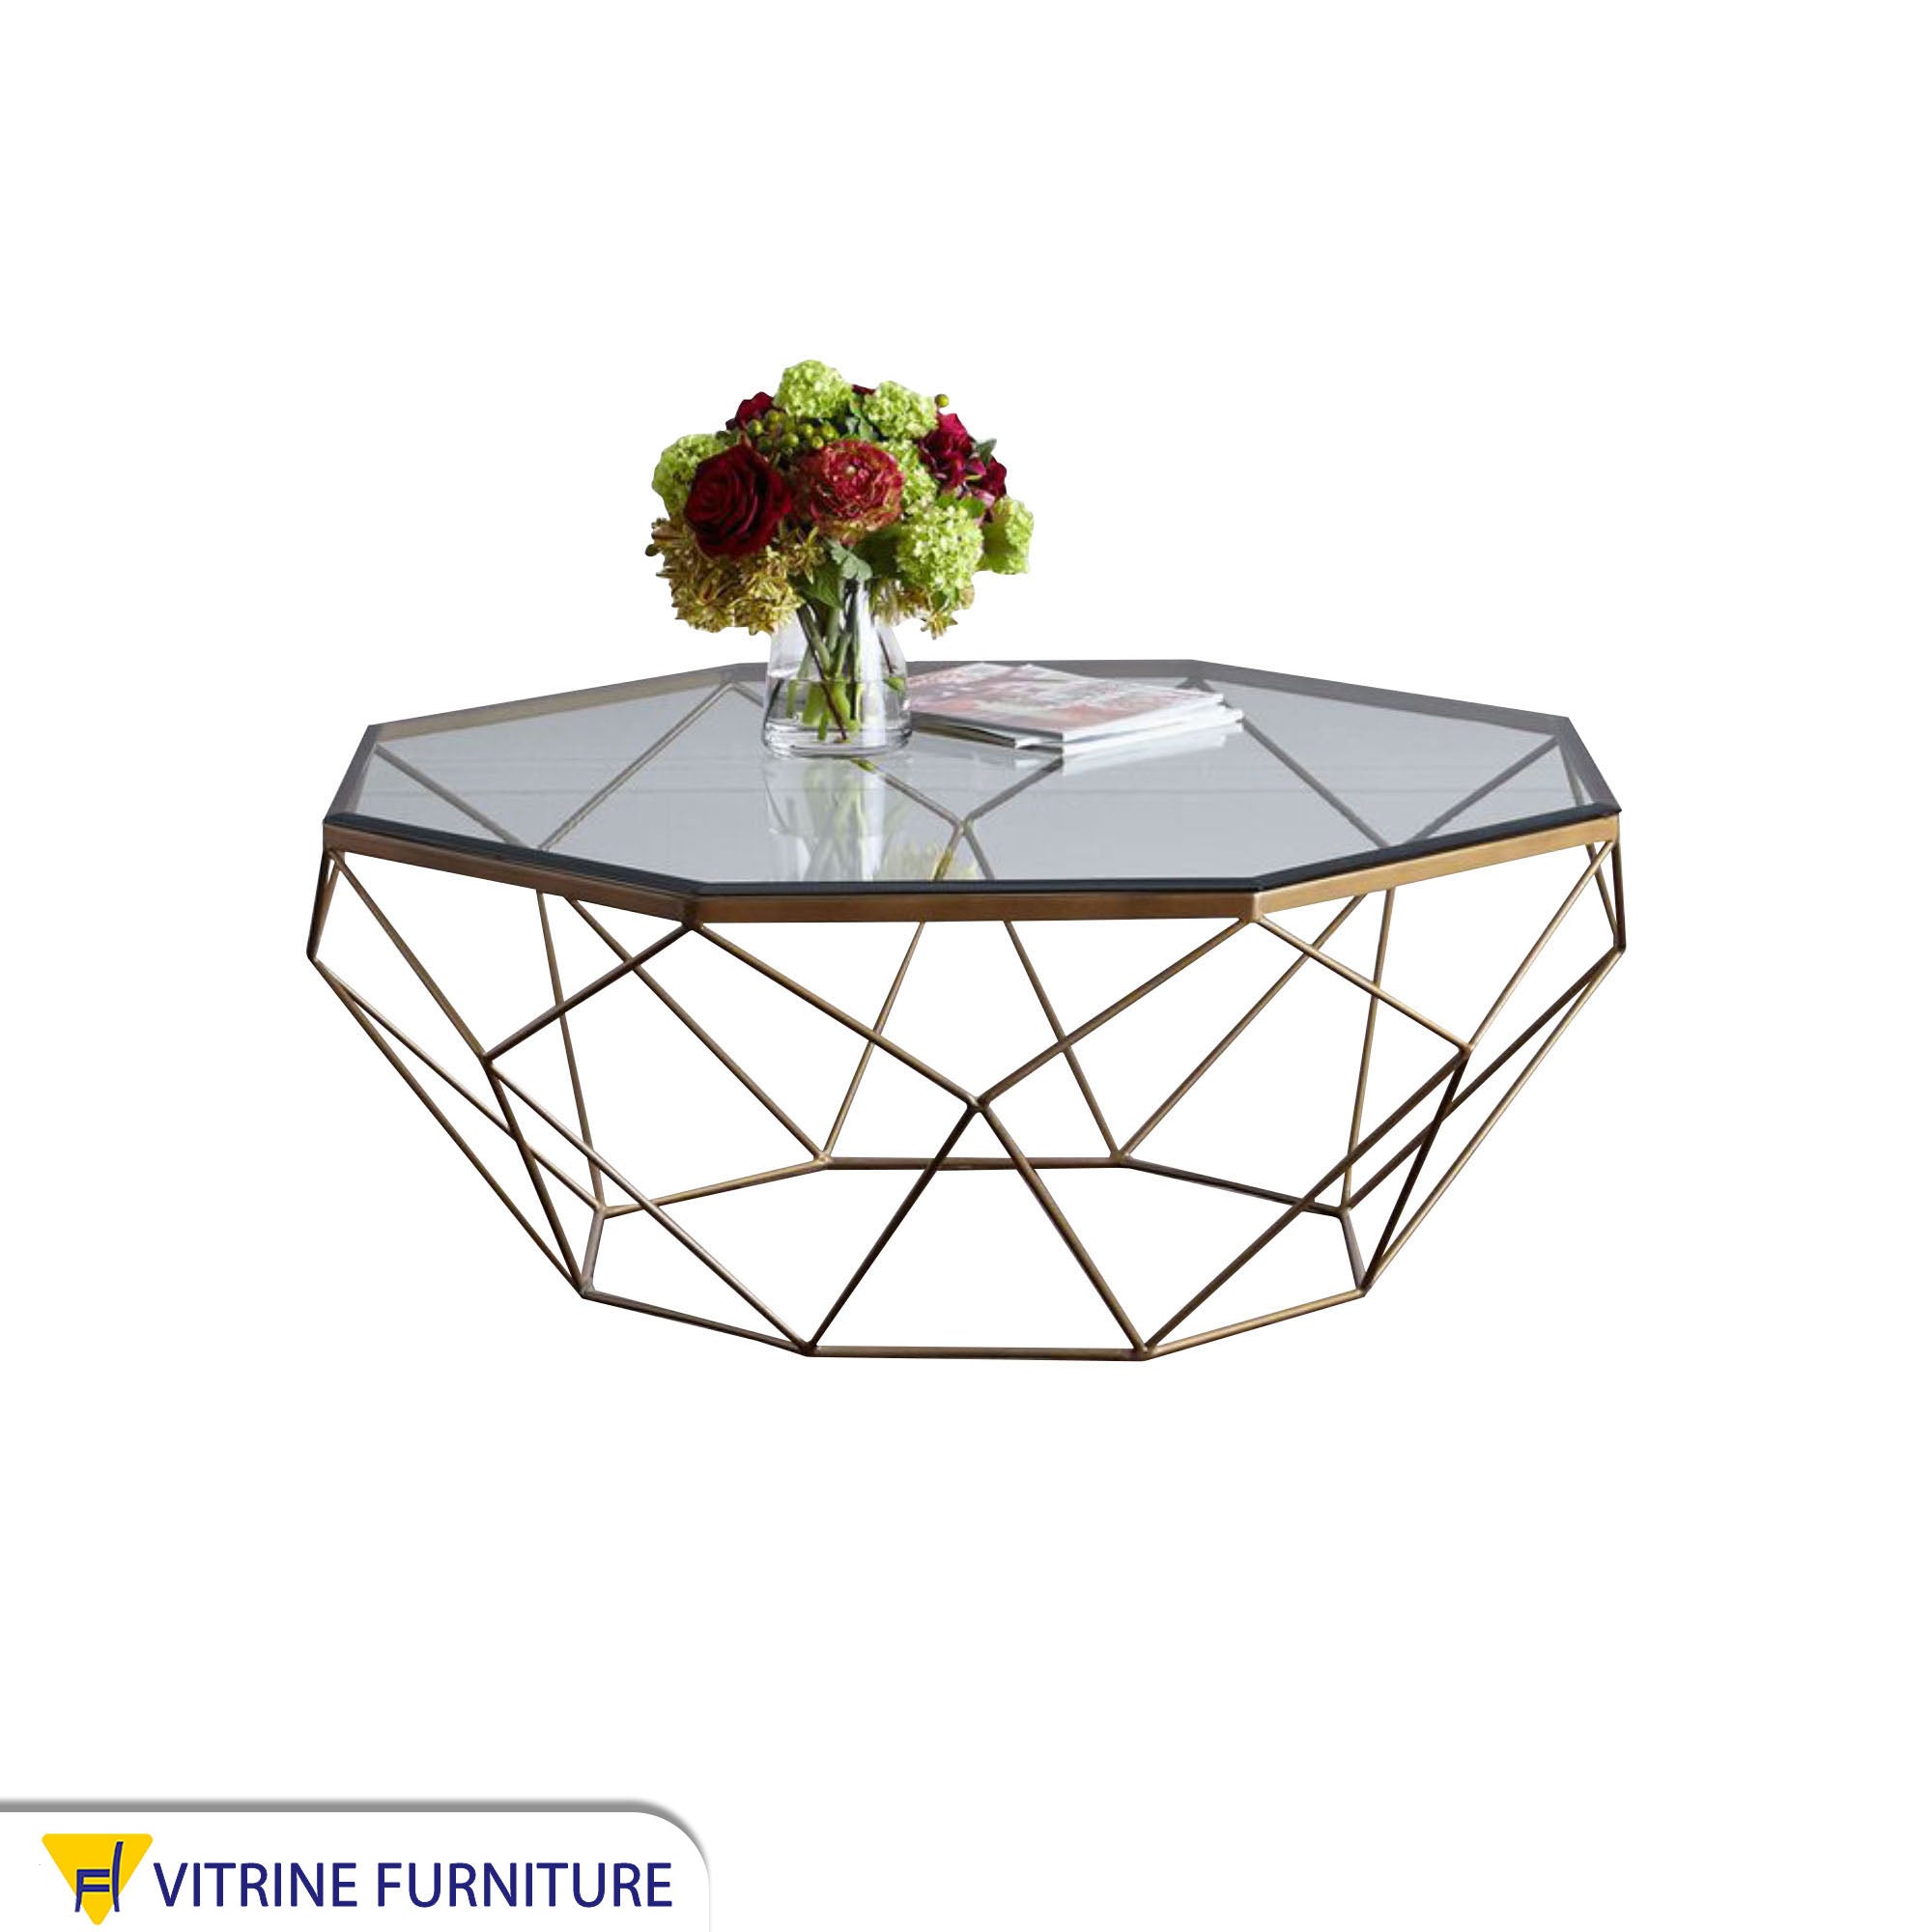 Polygonal center table with clear glass